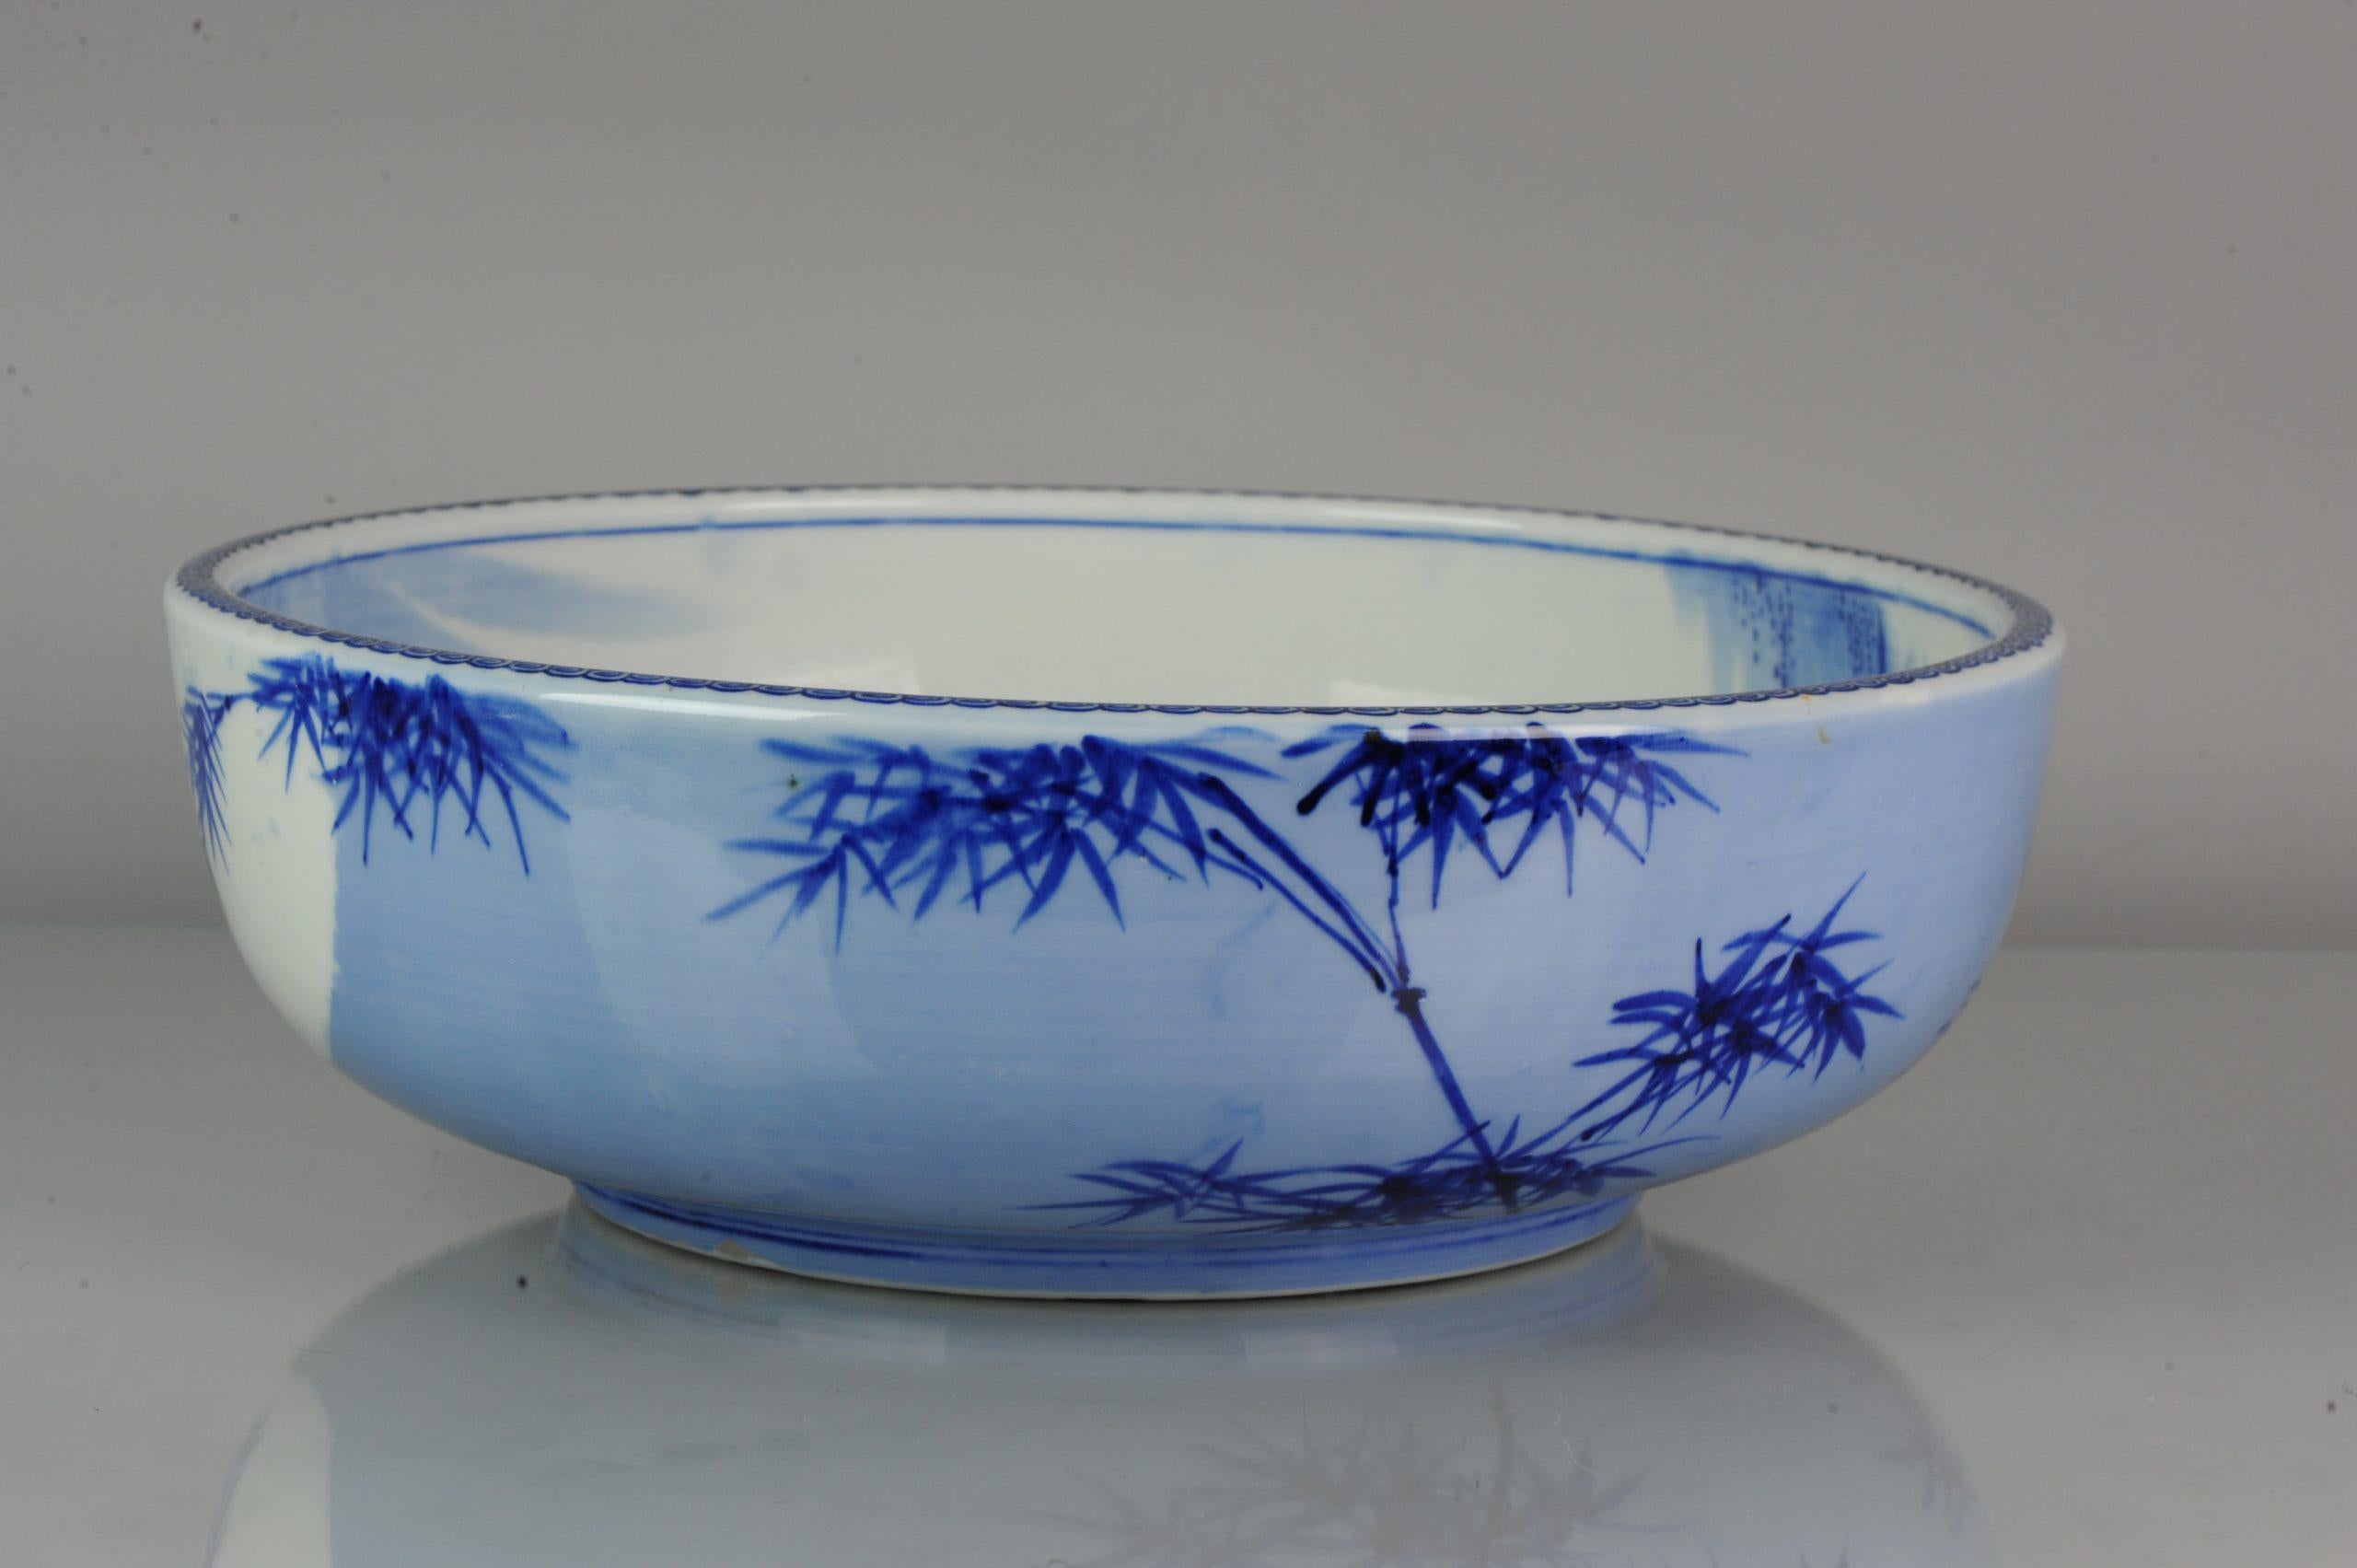 Large Arita Bowl Beautifull Japanese Porcelain 19th Century Edo/Meiji Period In Excellent Condition For Sale In Amsterdam, Noord Holland